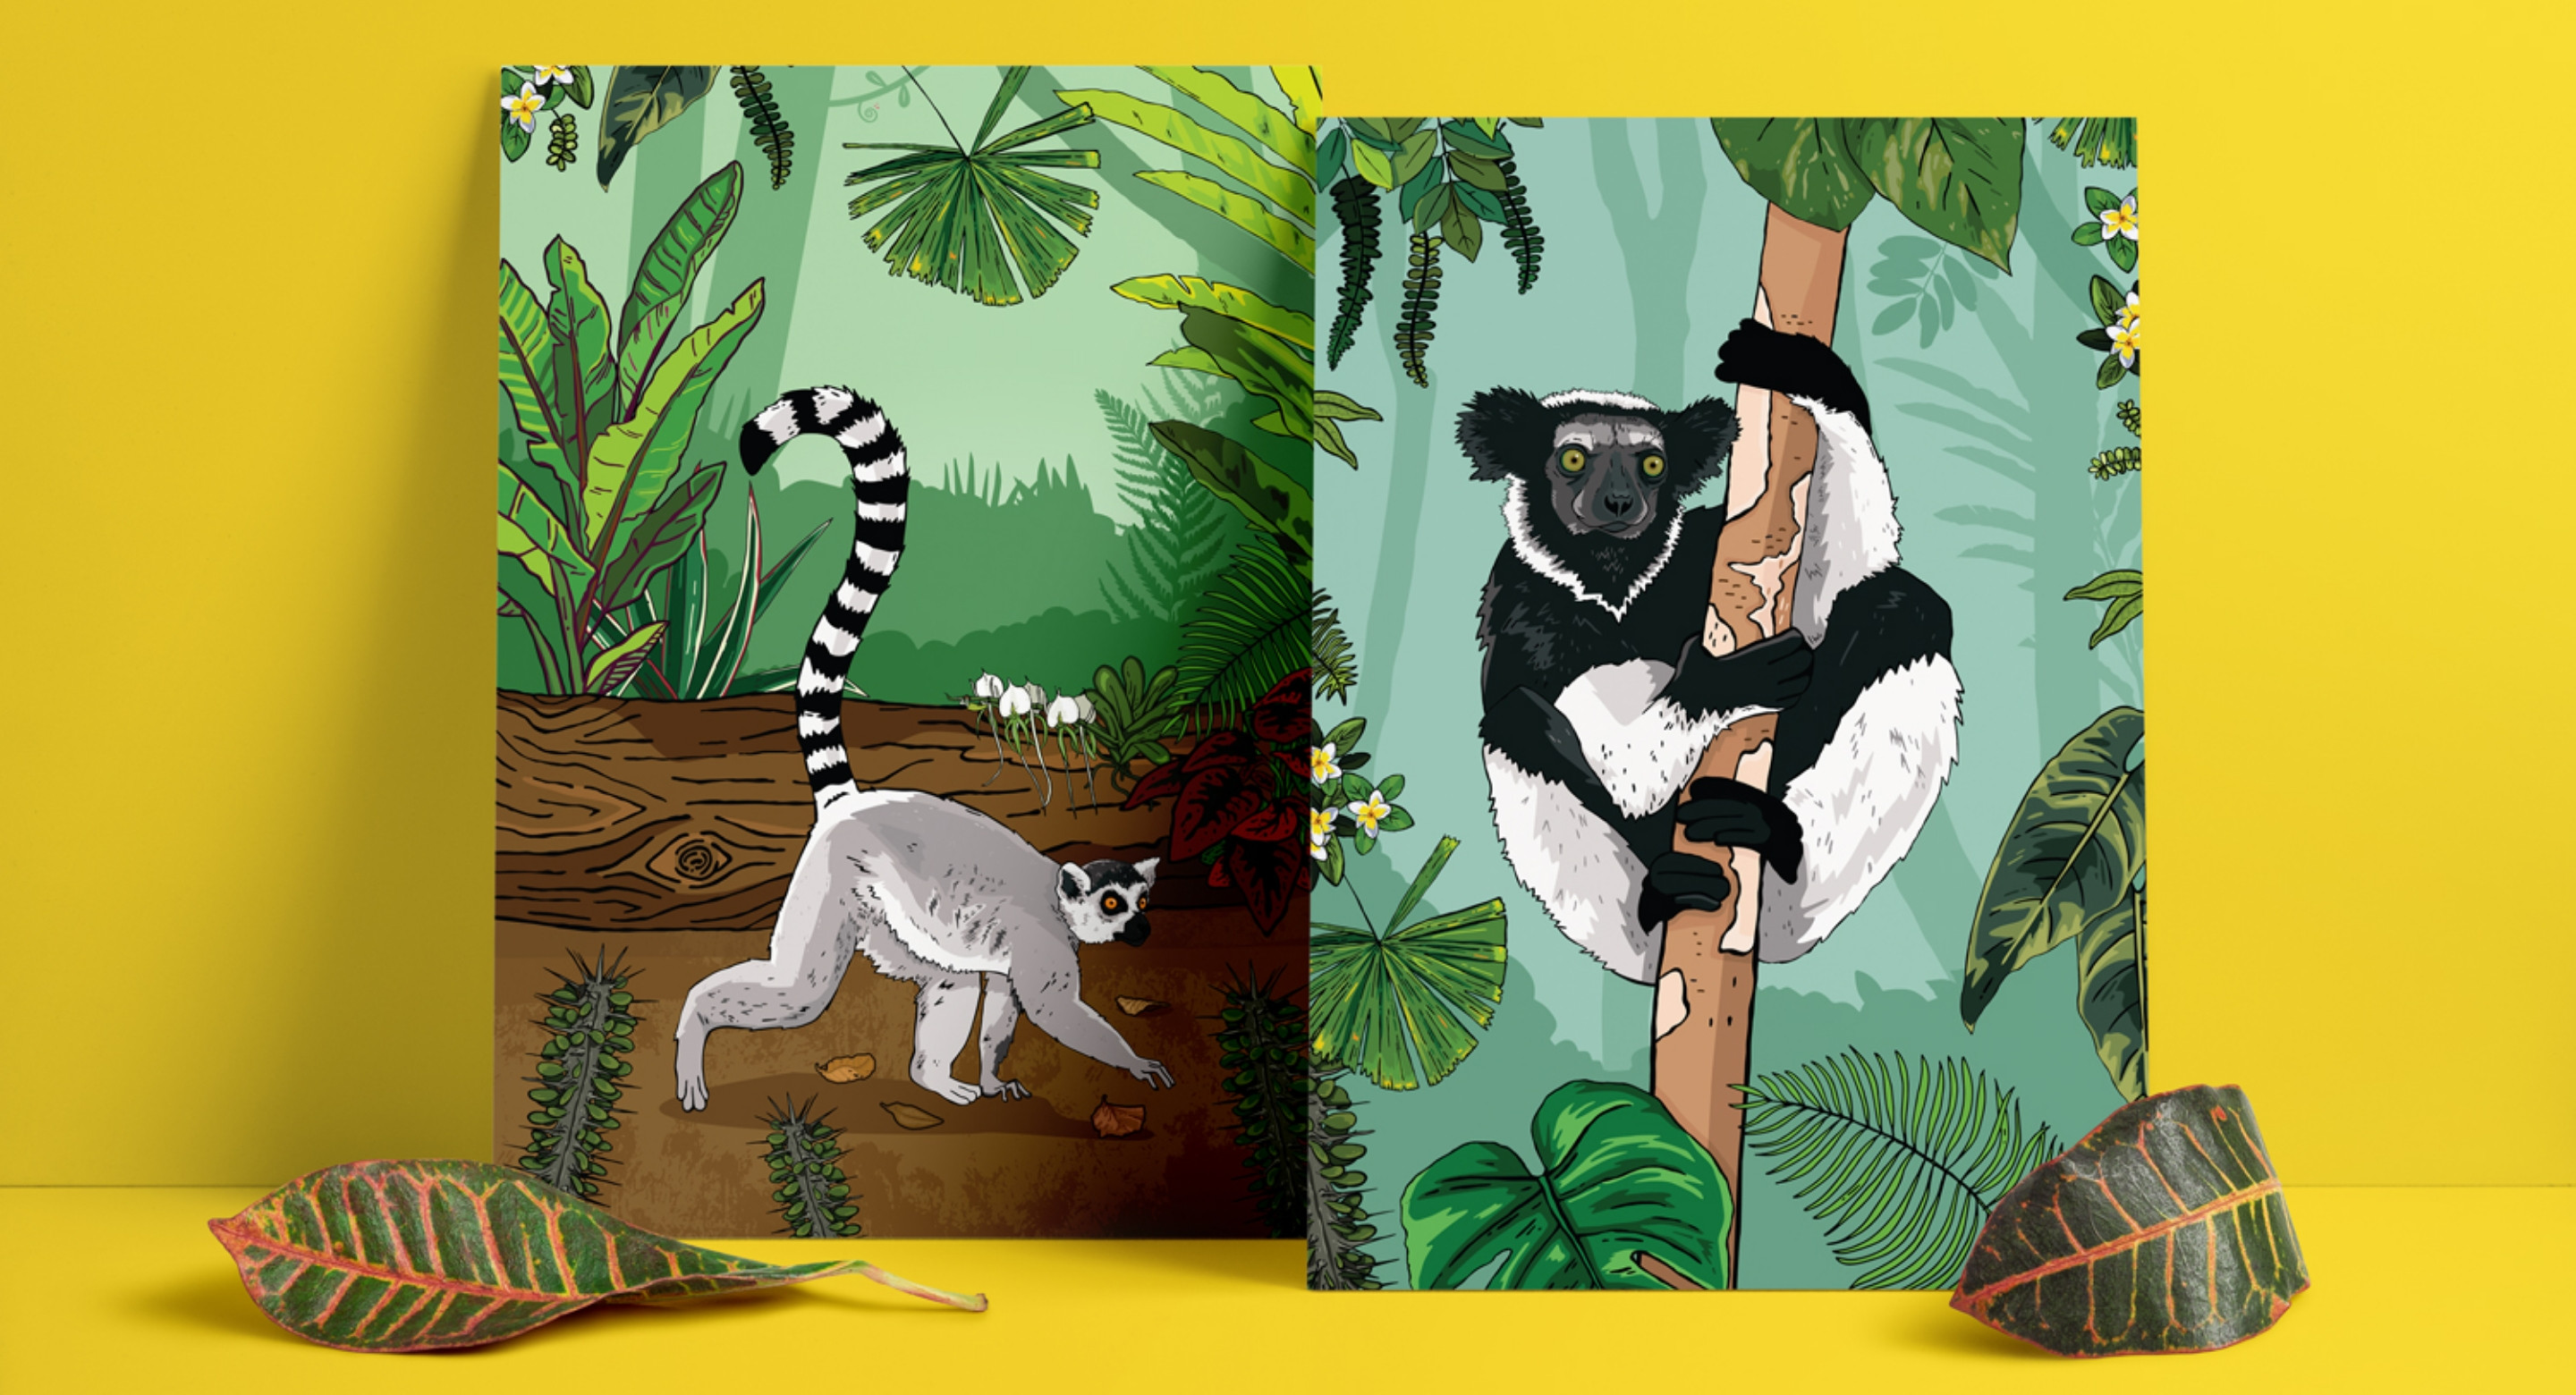 Chester Zoo illustrated lemur designs by Root Studio